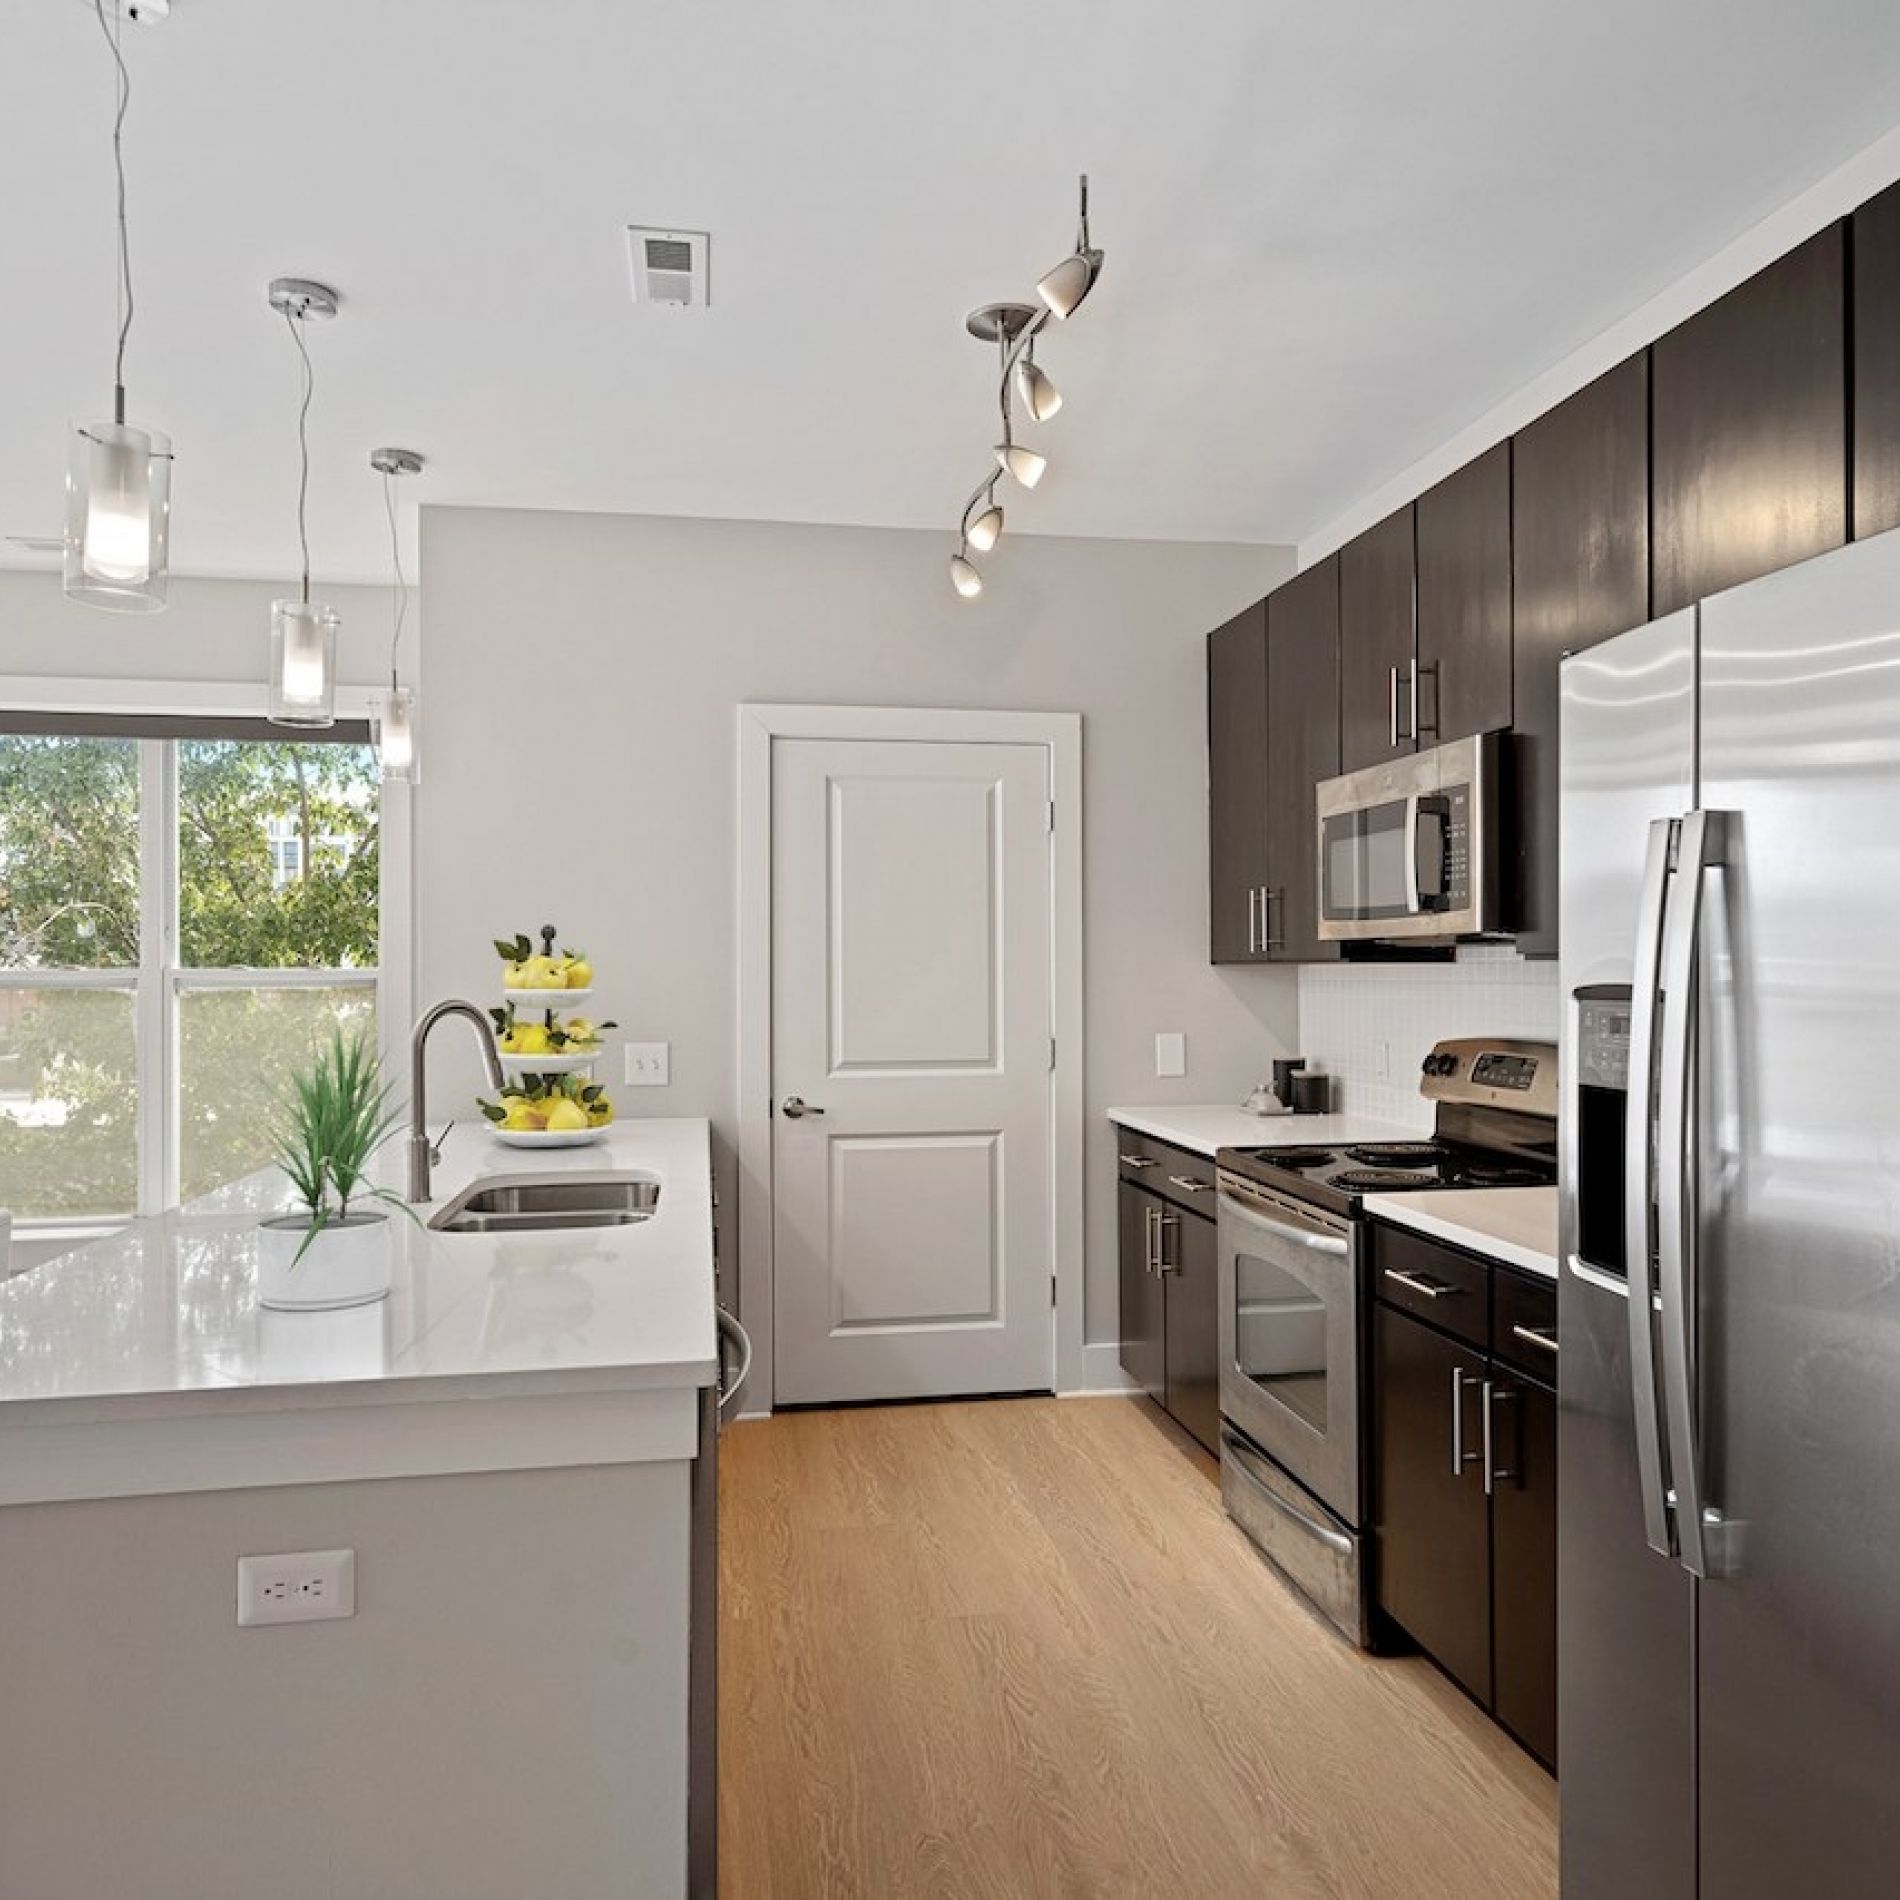 Modern kitchen interior at Hawthorne 808 featuring stainless steel appliances, dark wood cabinetry, and a central island with bar stools under stylish pendant lighting.